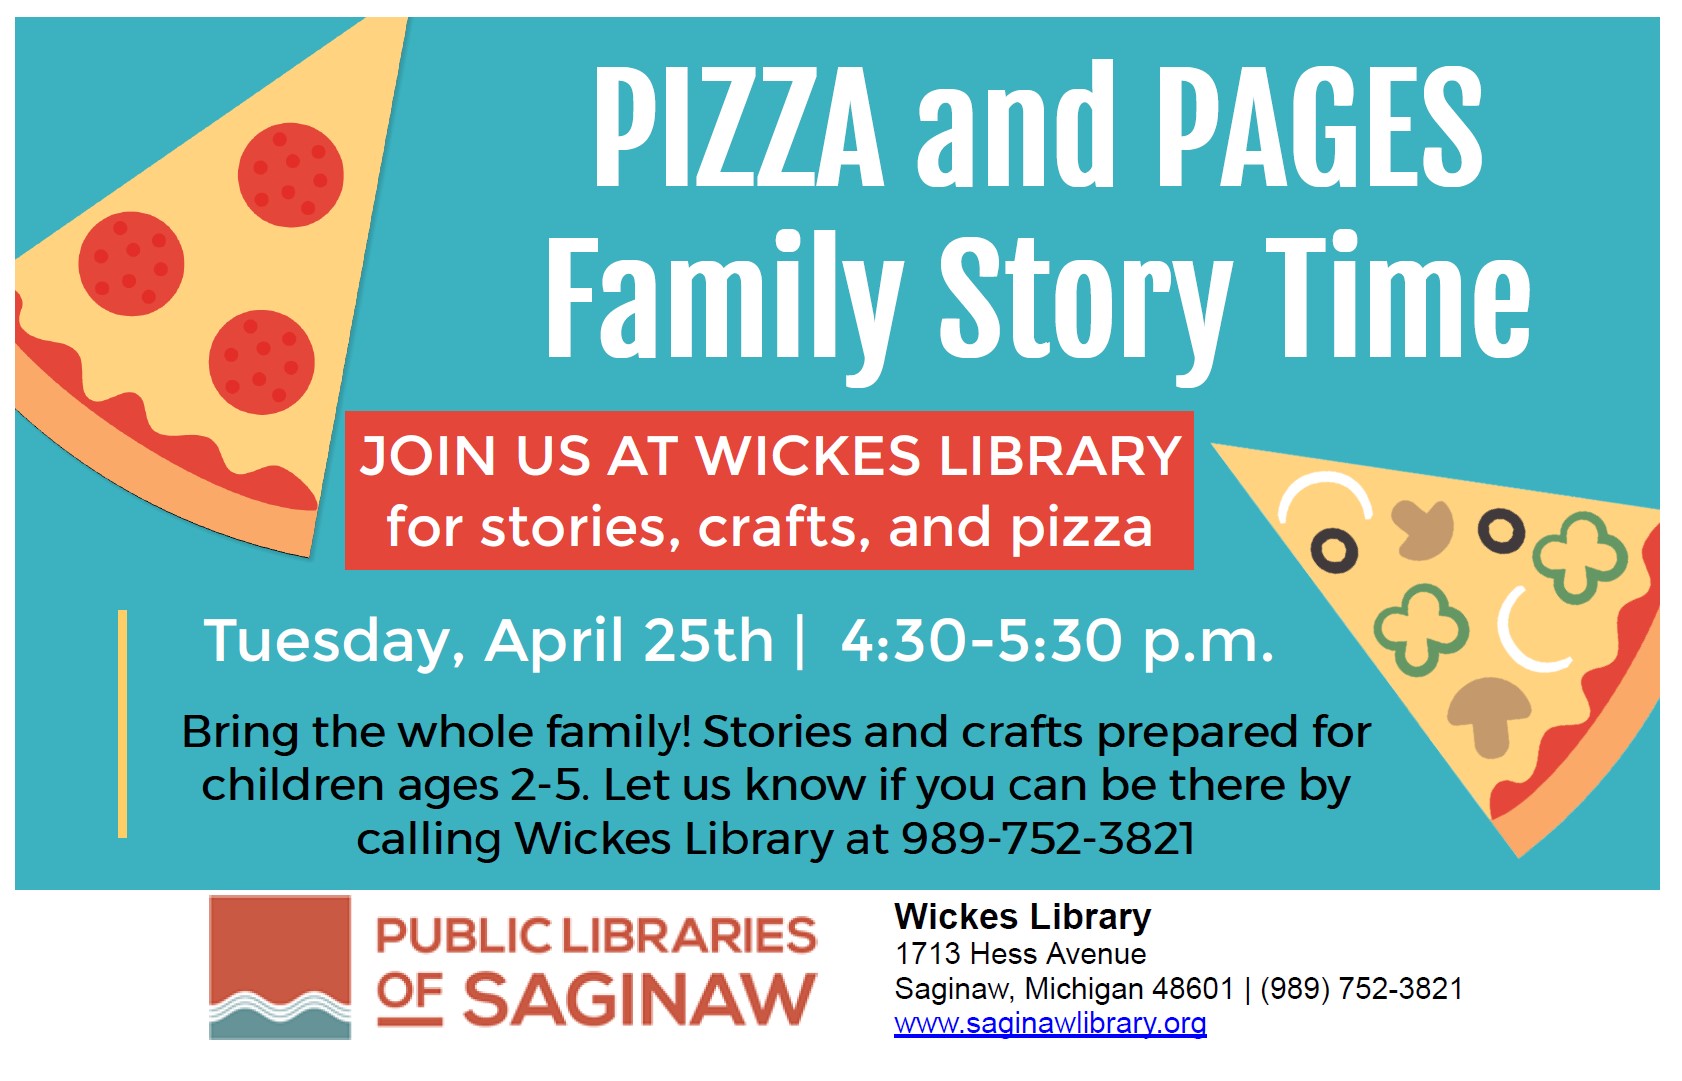 Pizza and Pages Family Story Time at Wickes  - April 25 at 4:30 p.m.